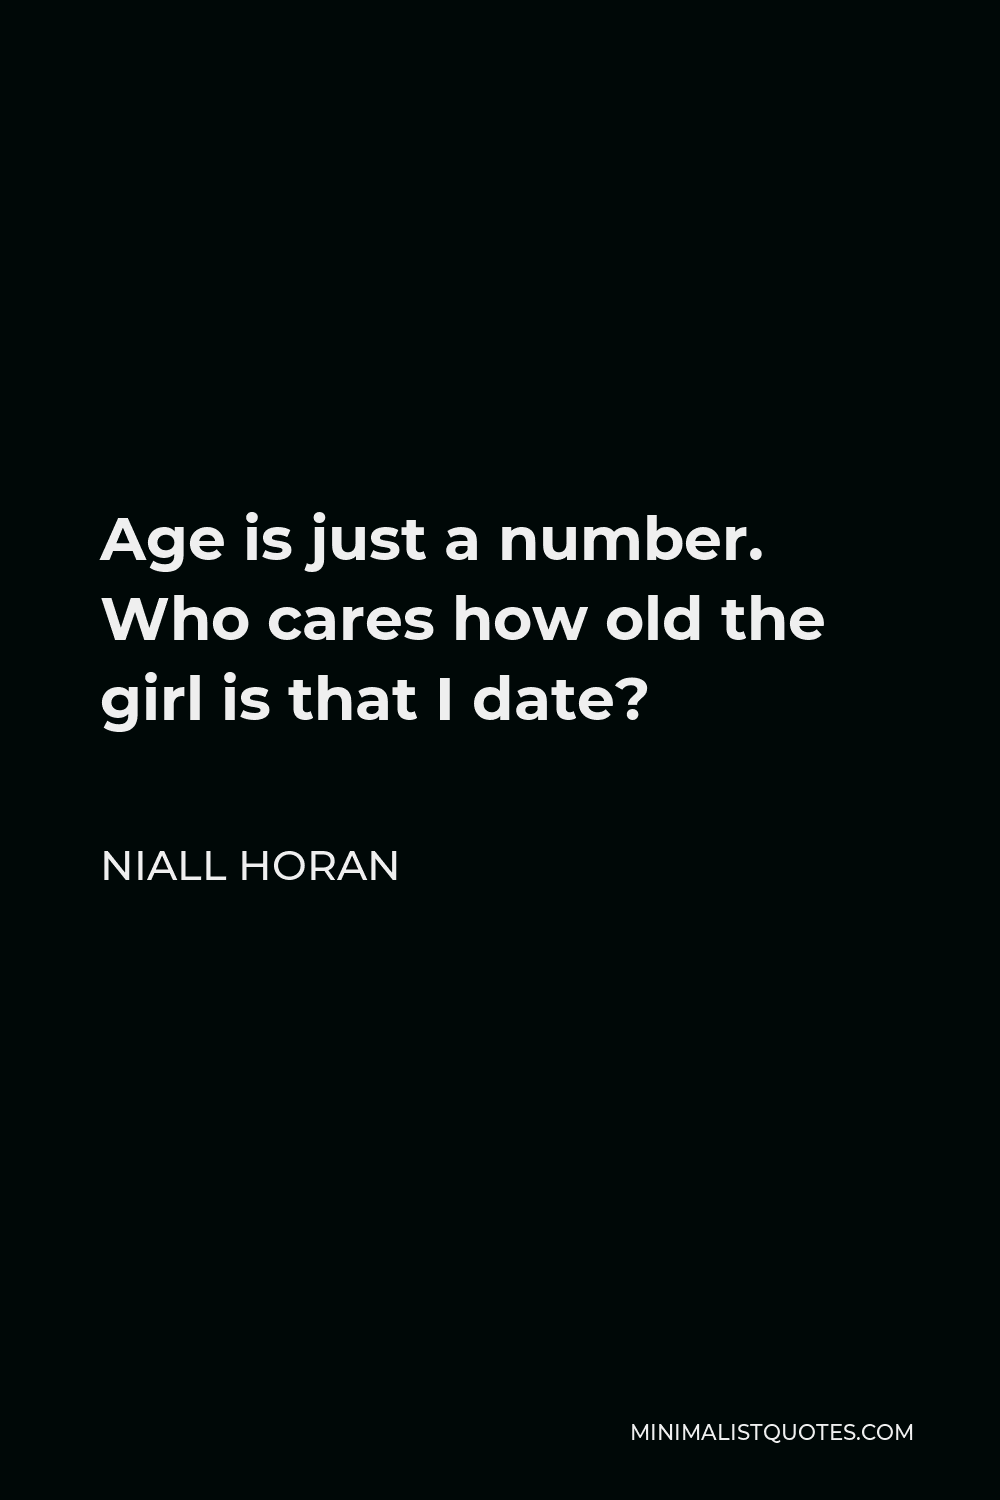 Niall Horan Quote - Age is just a number. Who cares how old the girl is that I date?